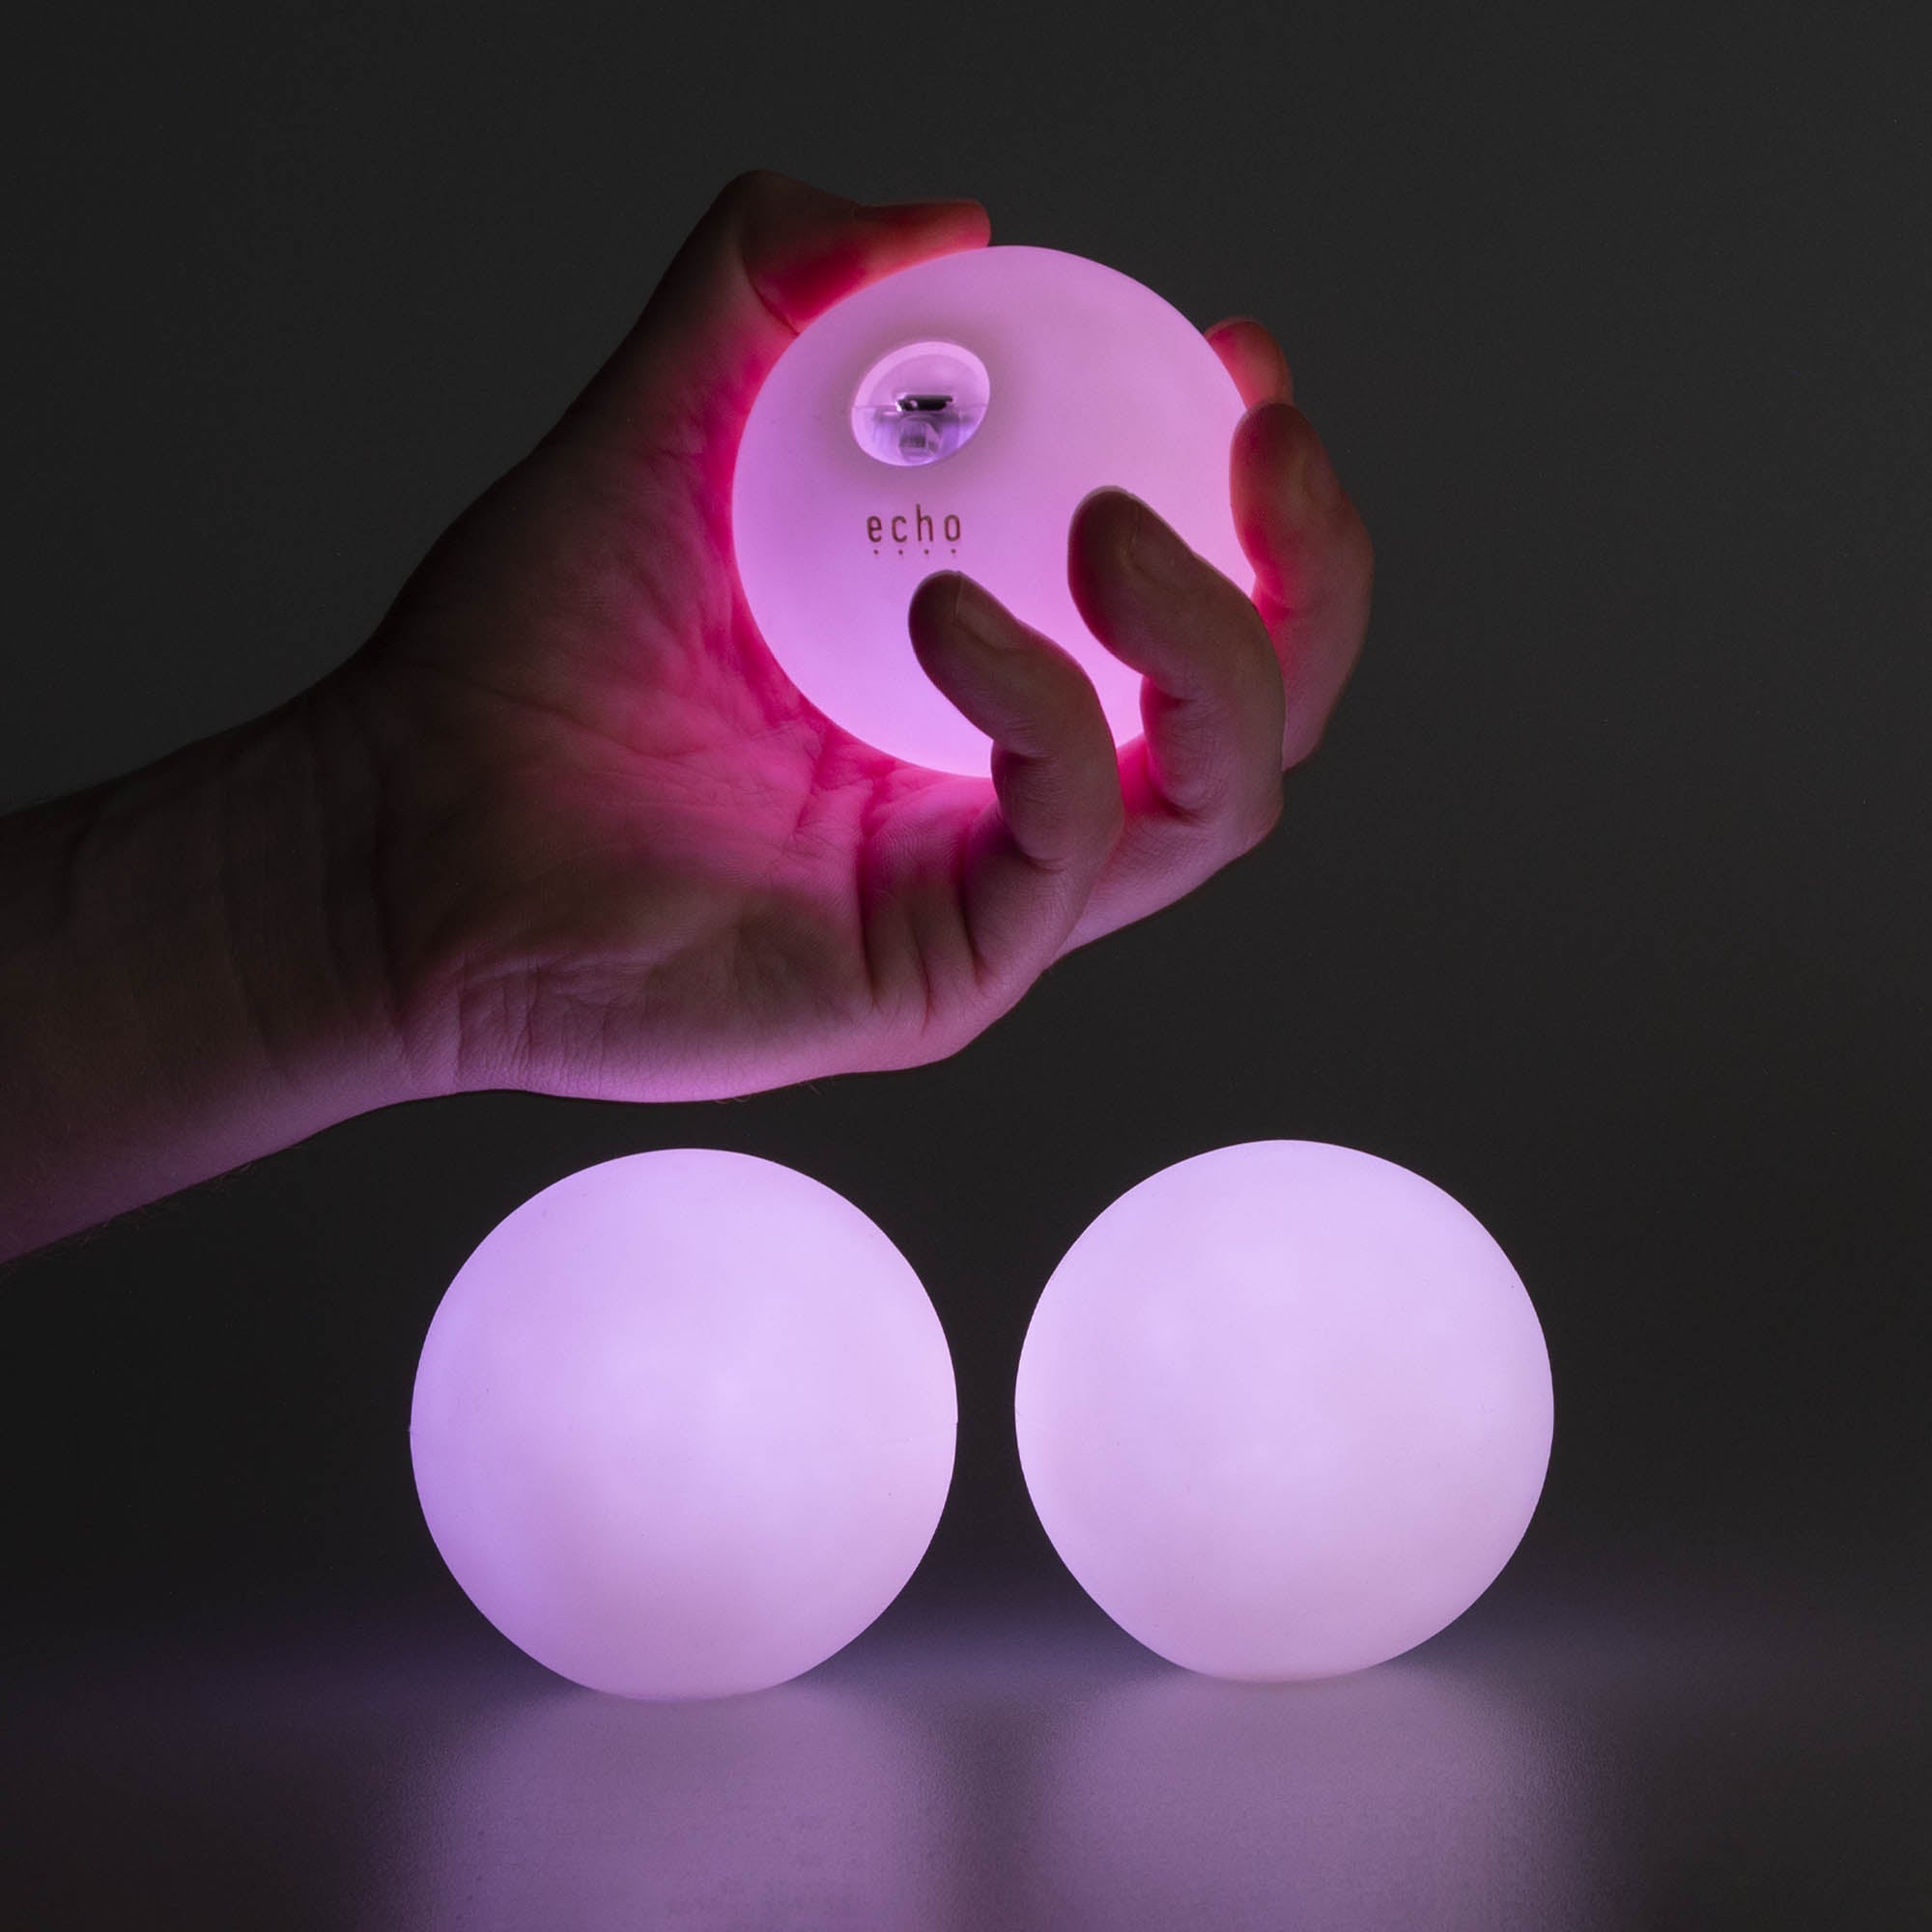 3 balls glowing with one being held